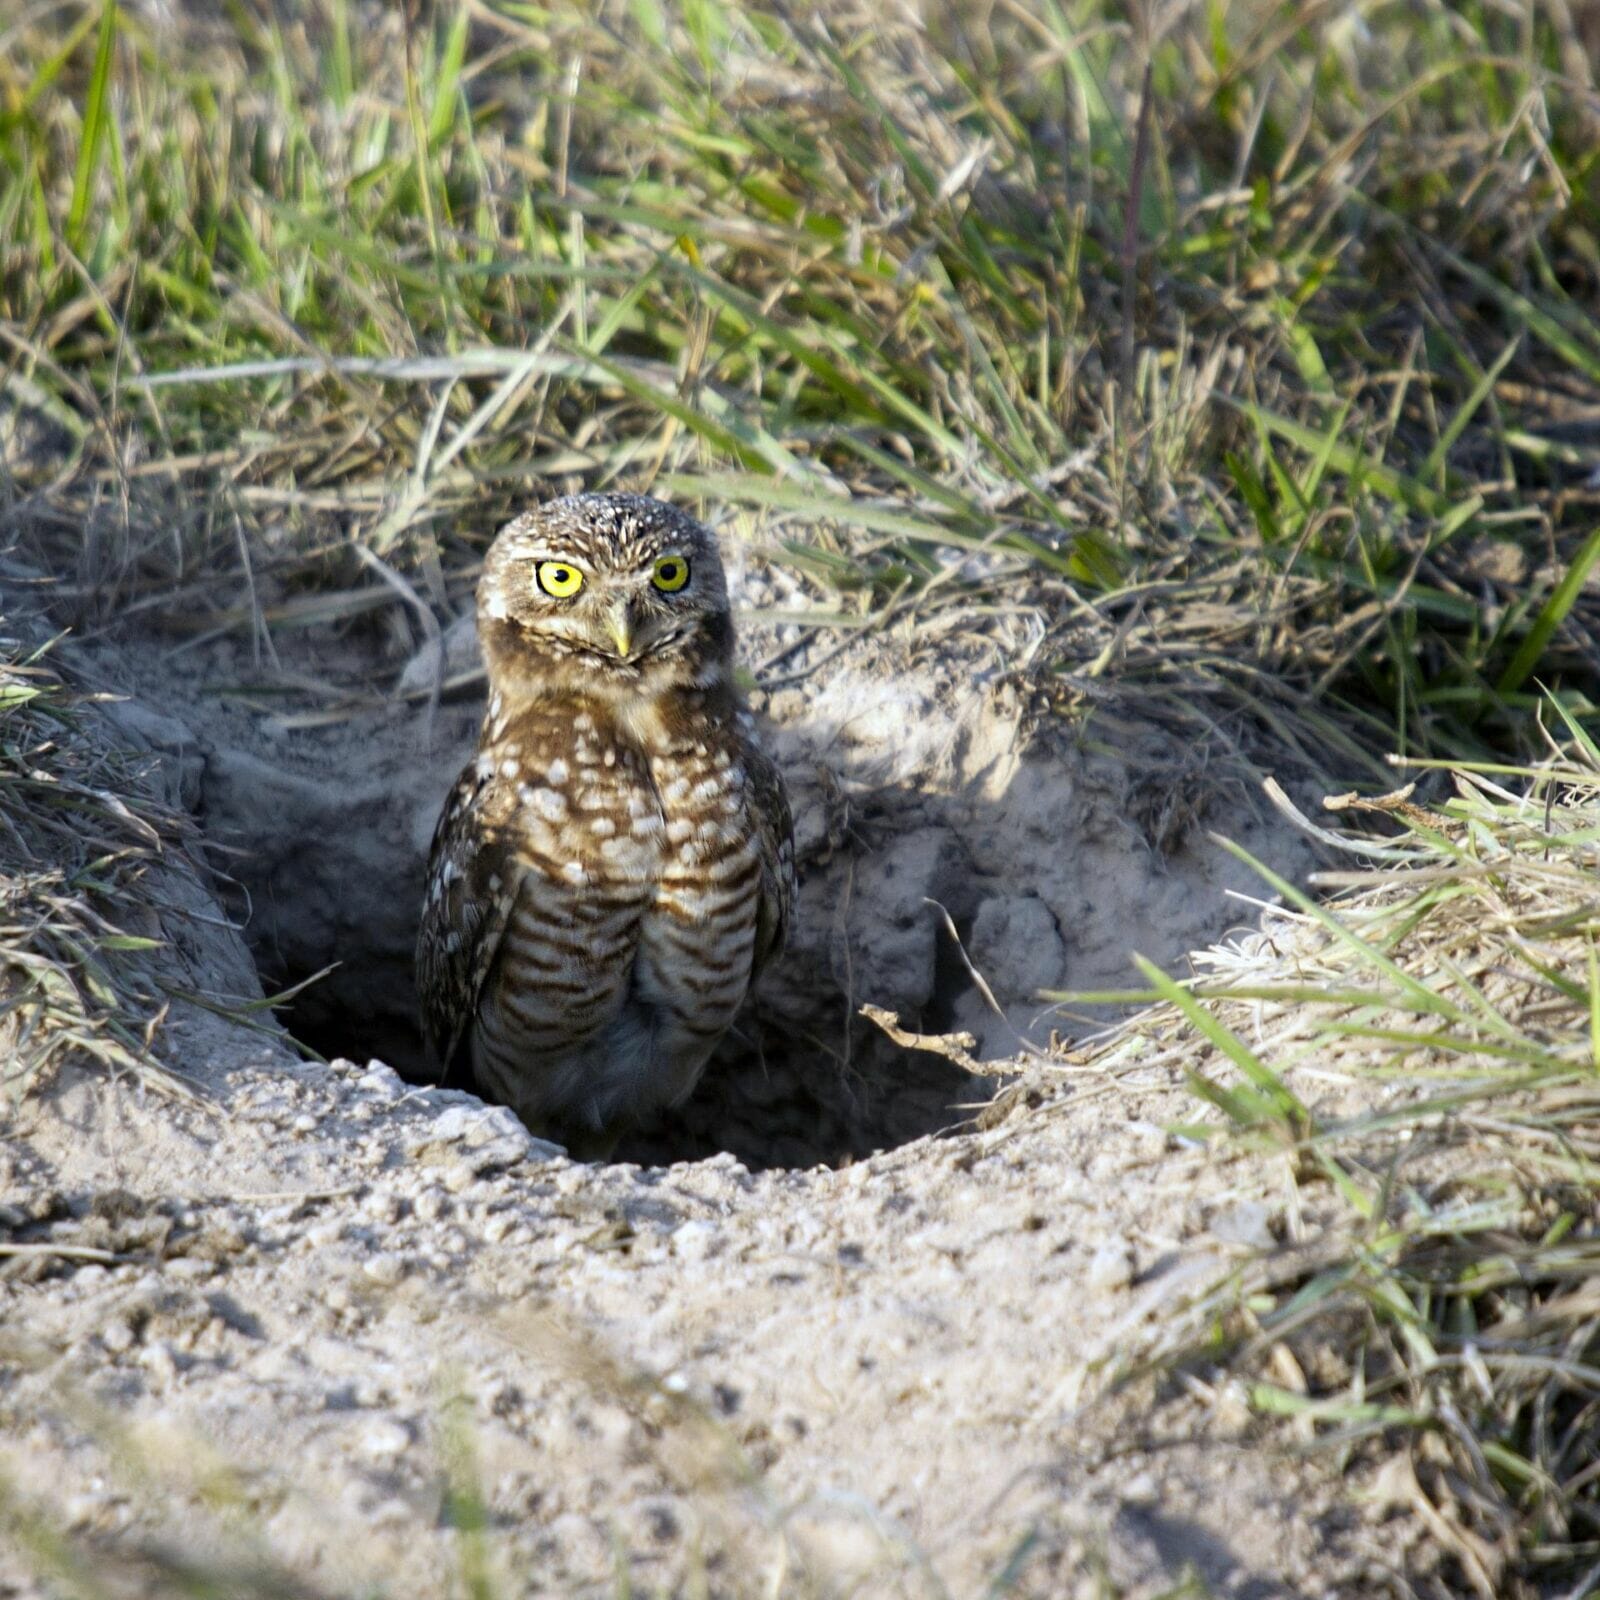 Burrowing owl in whole in ground surrounded by grass.